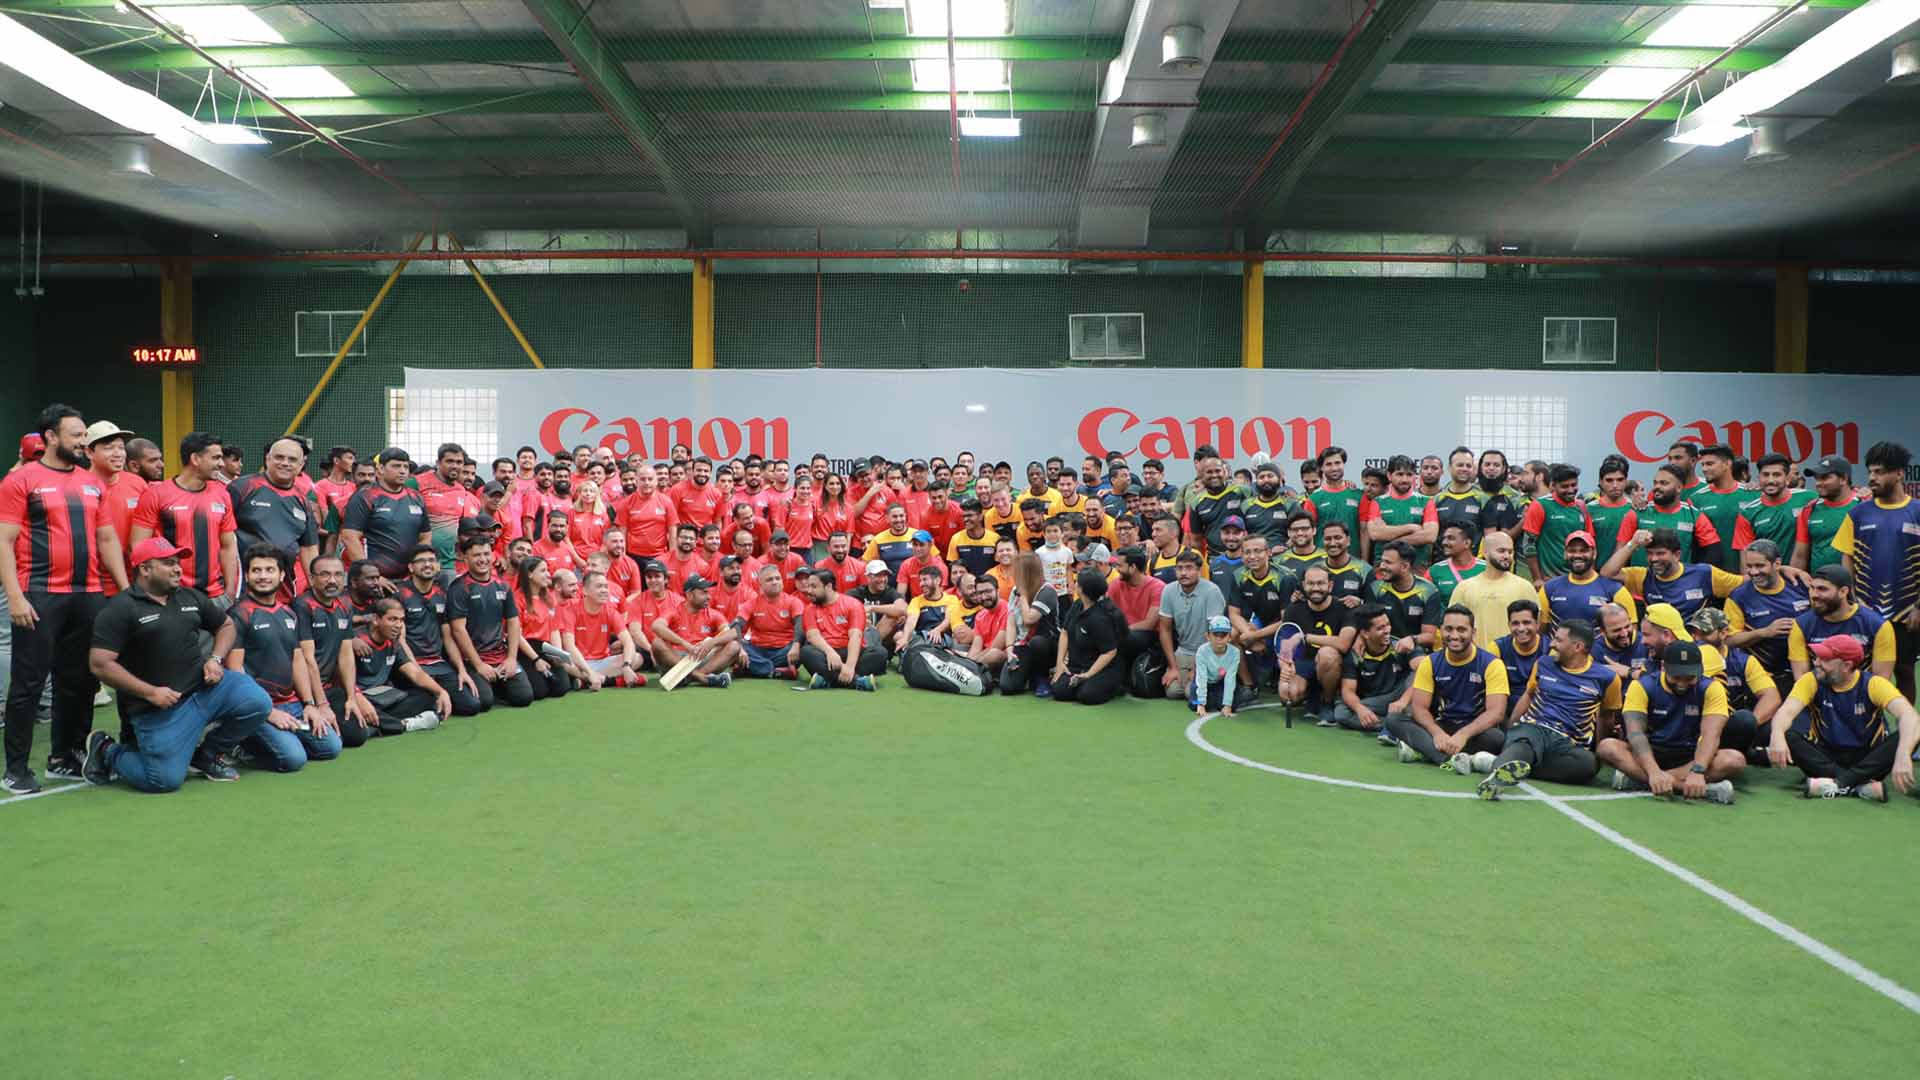 Canon organizes a sports event with partners in the spirit of cooperation